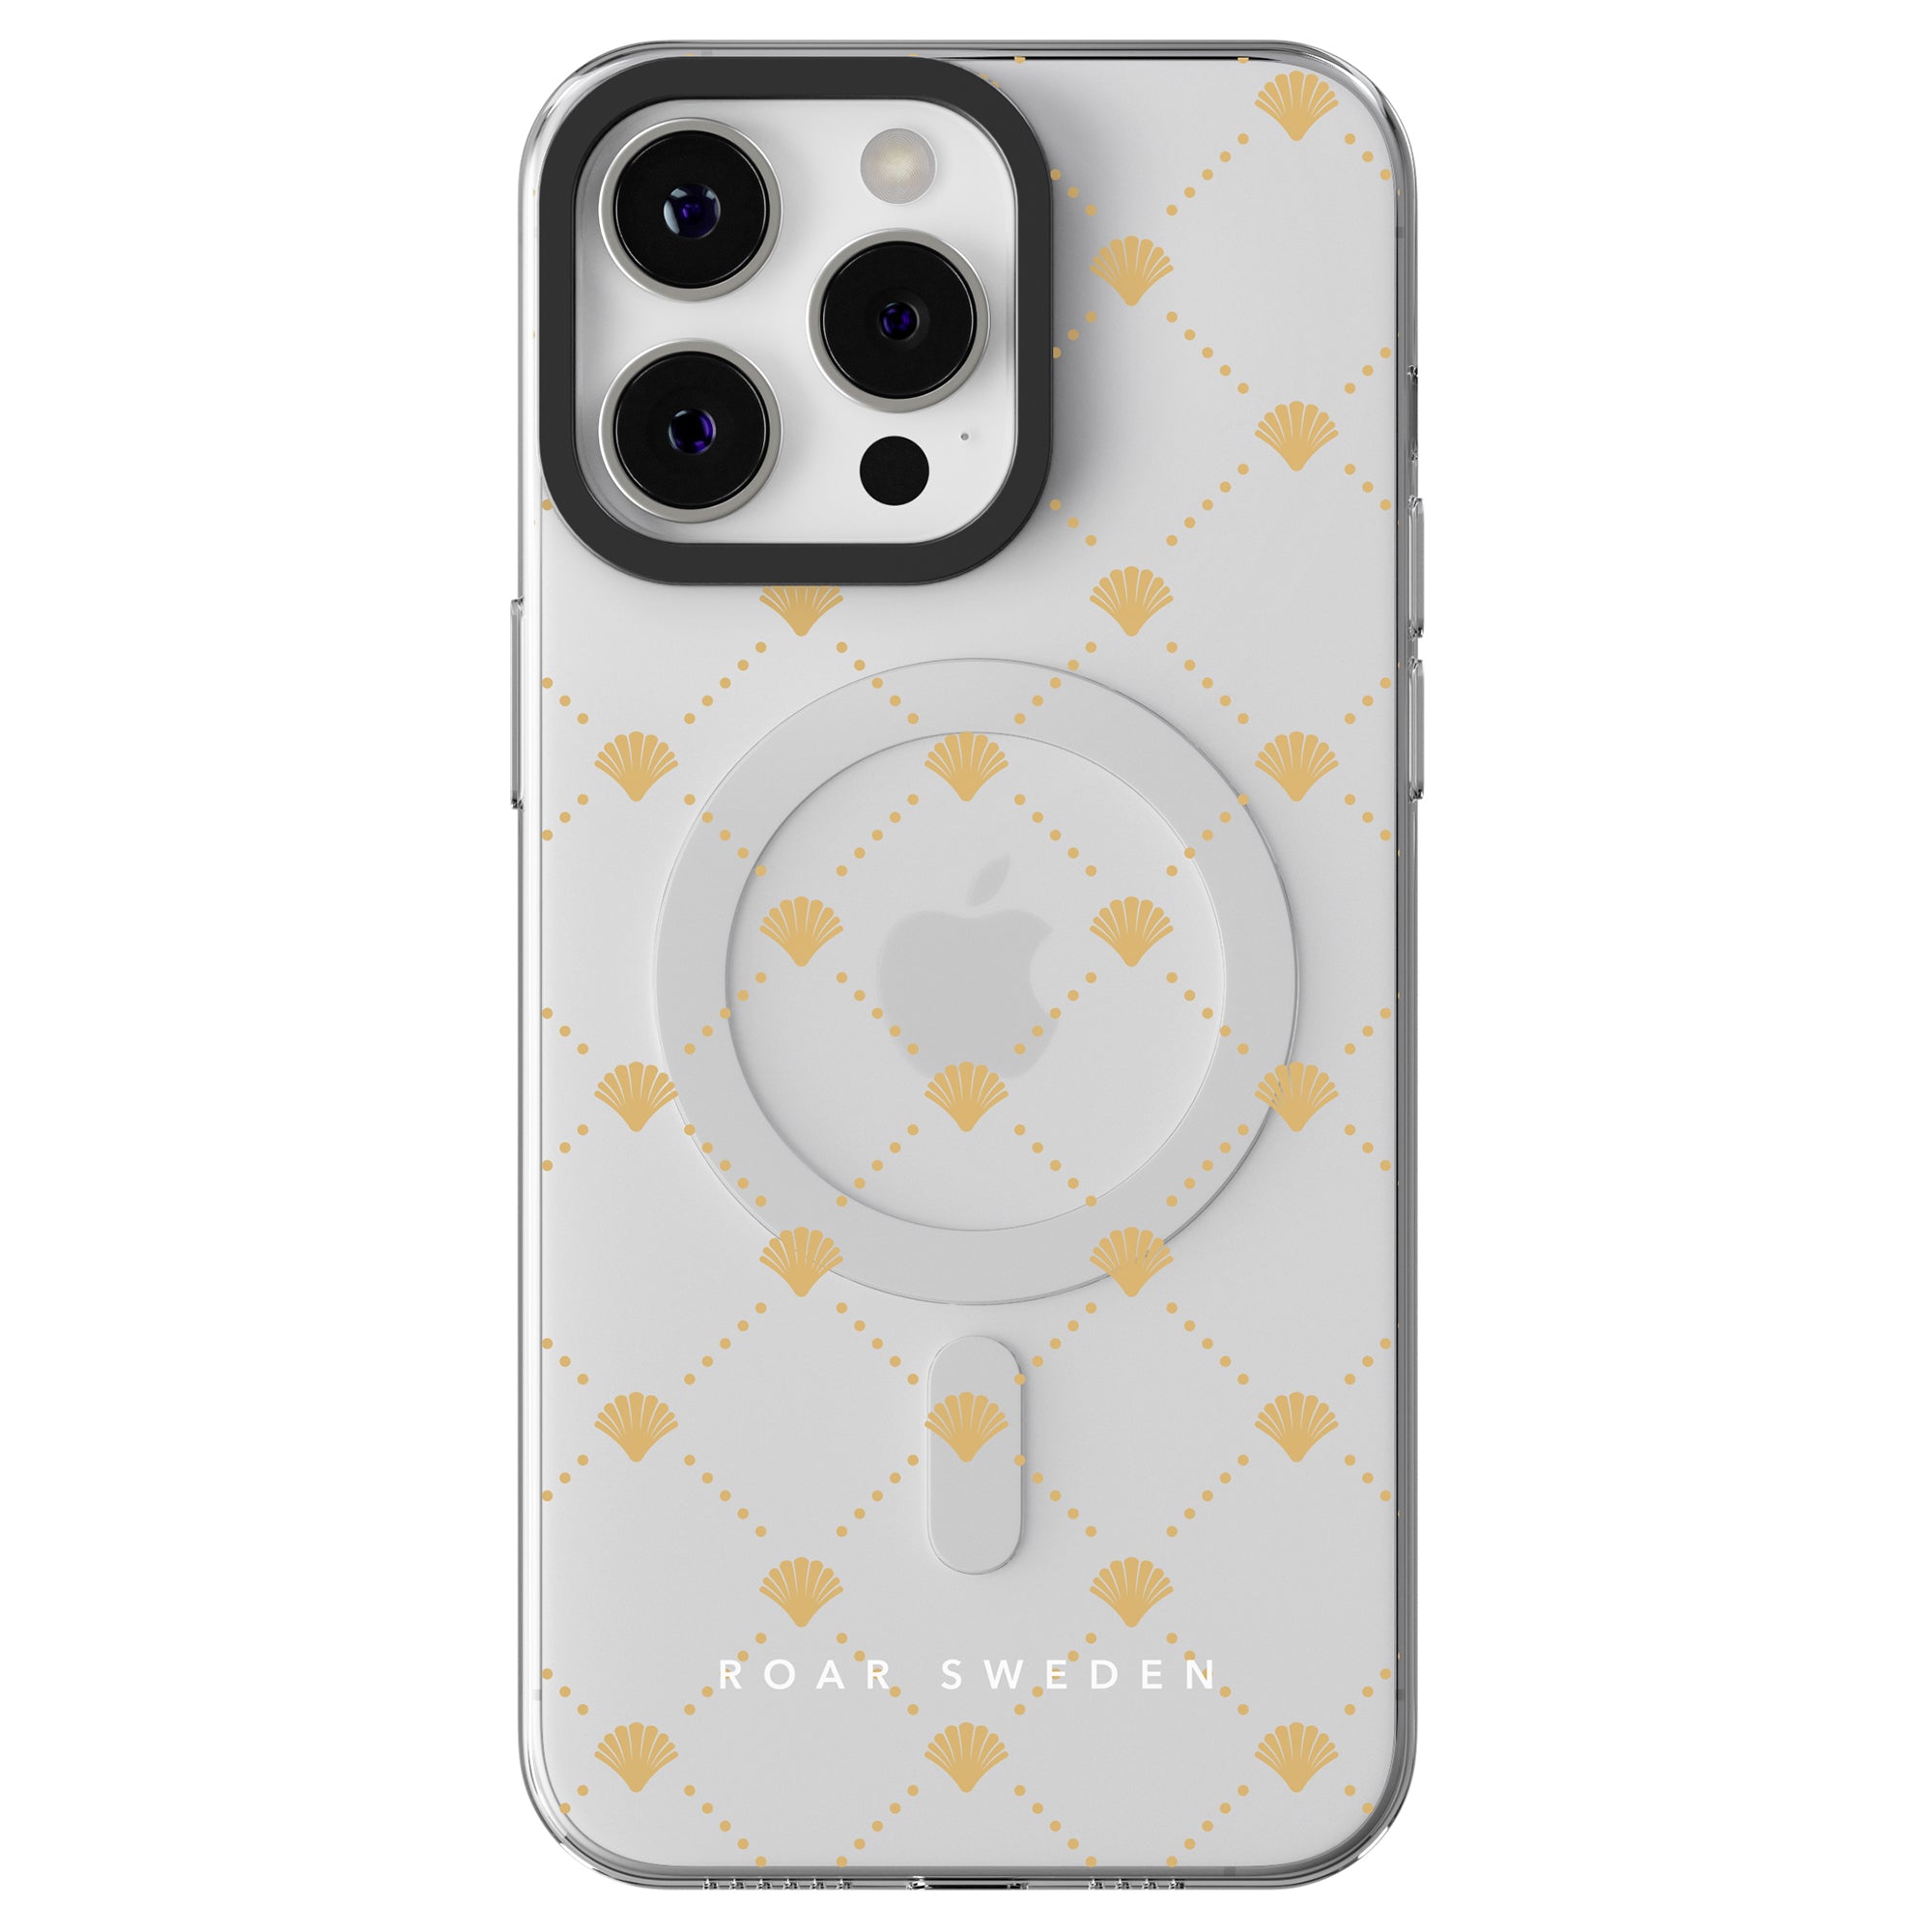 A white iPhone with a camera module featuring three lenses, adorned with a gold geometric pattern of shells from the Luxe Shells - MagSafe and the text "ROAR SWEDEN" at the bottom.